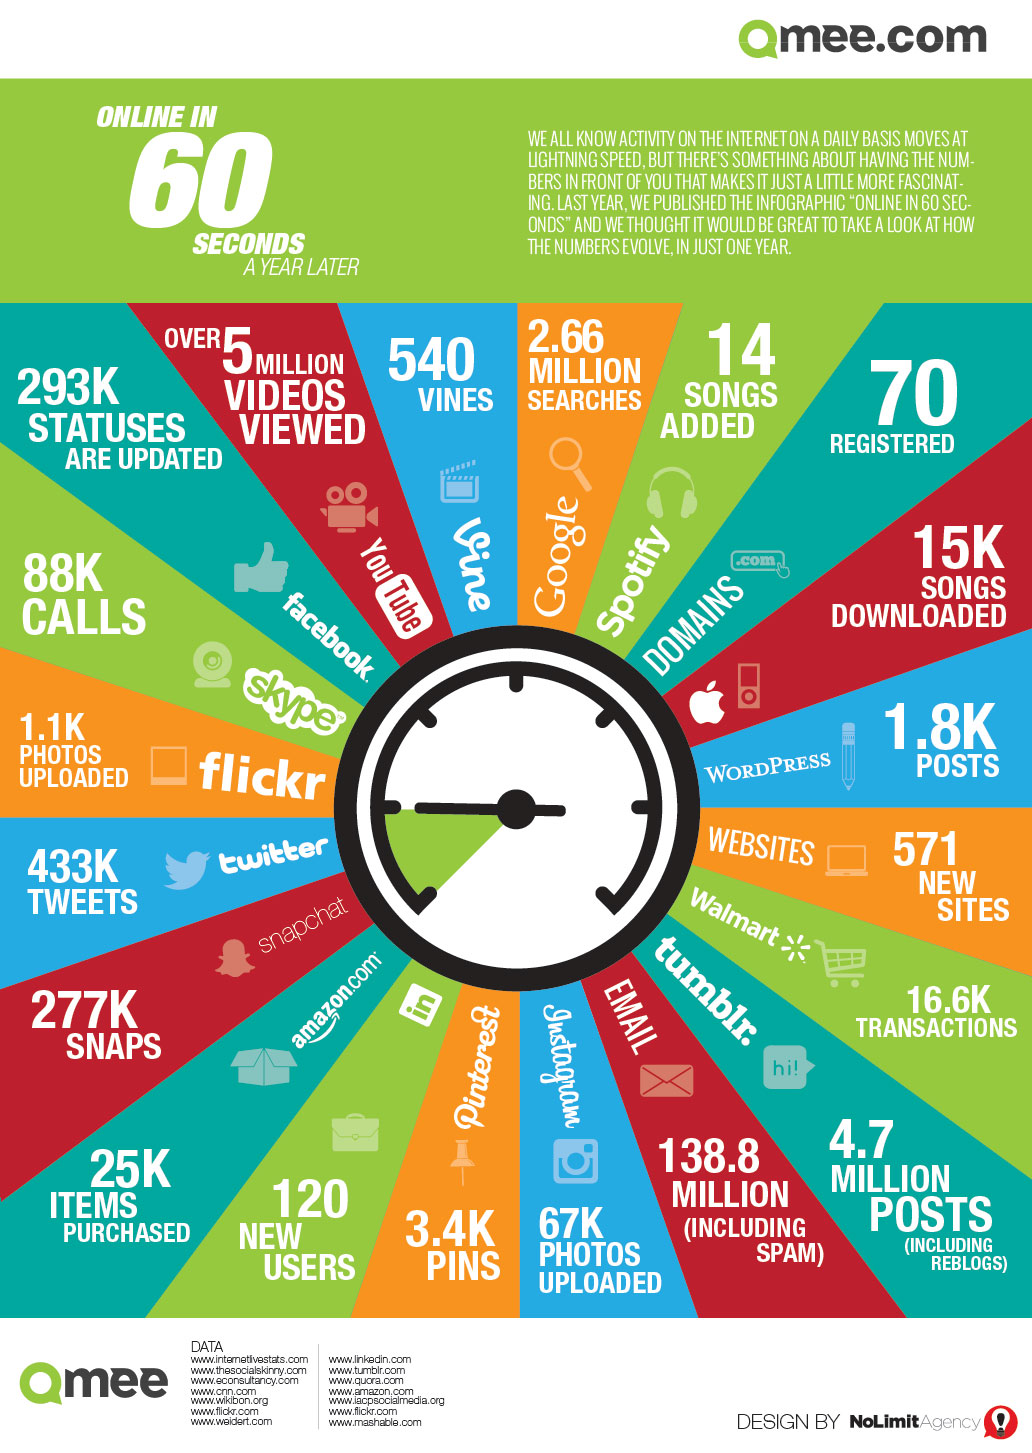 Zooma Infographic Online in 60 seconds